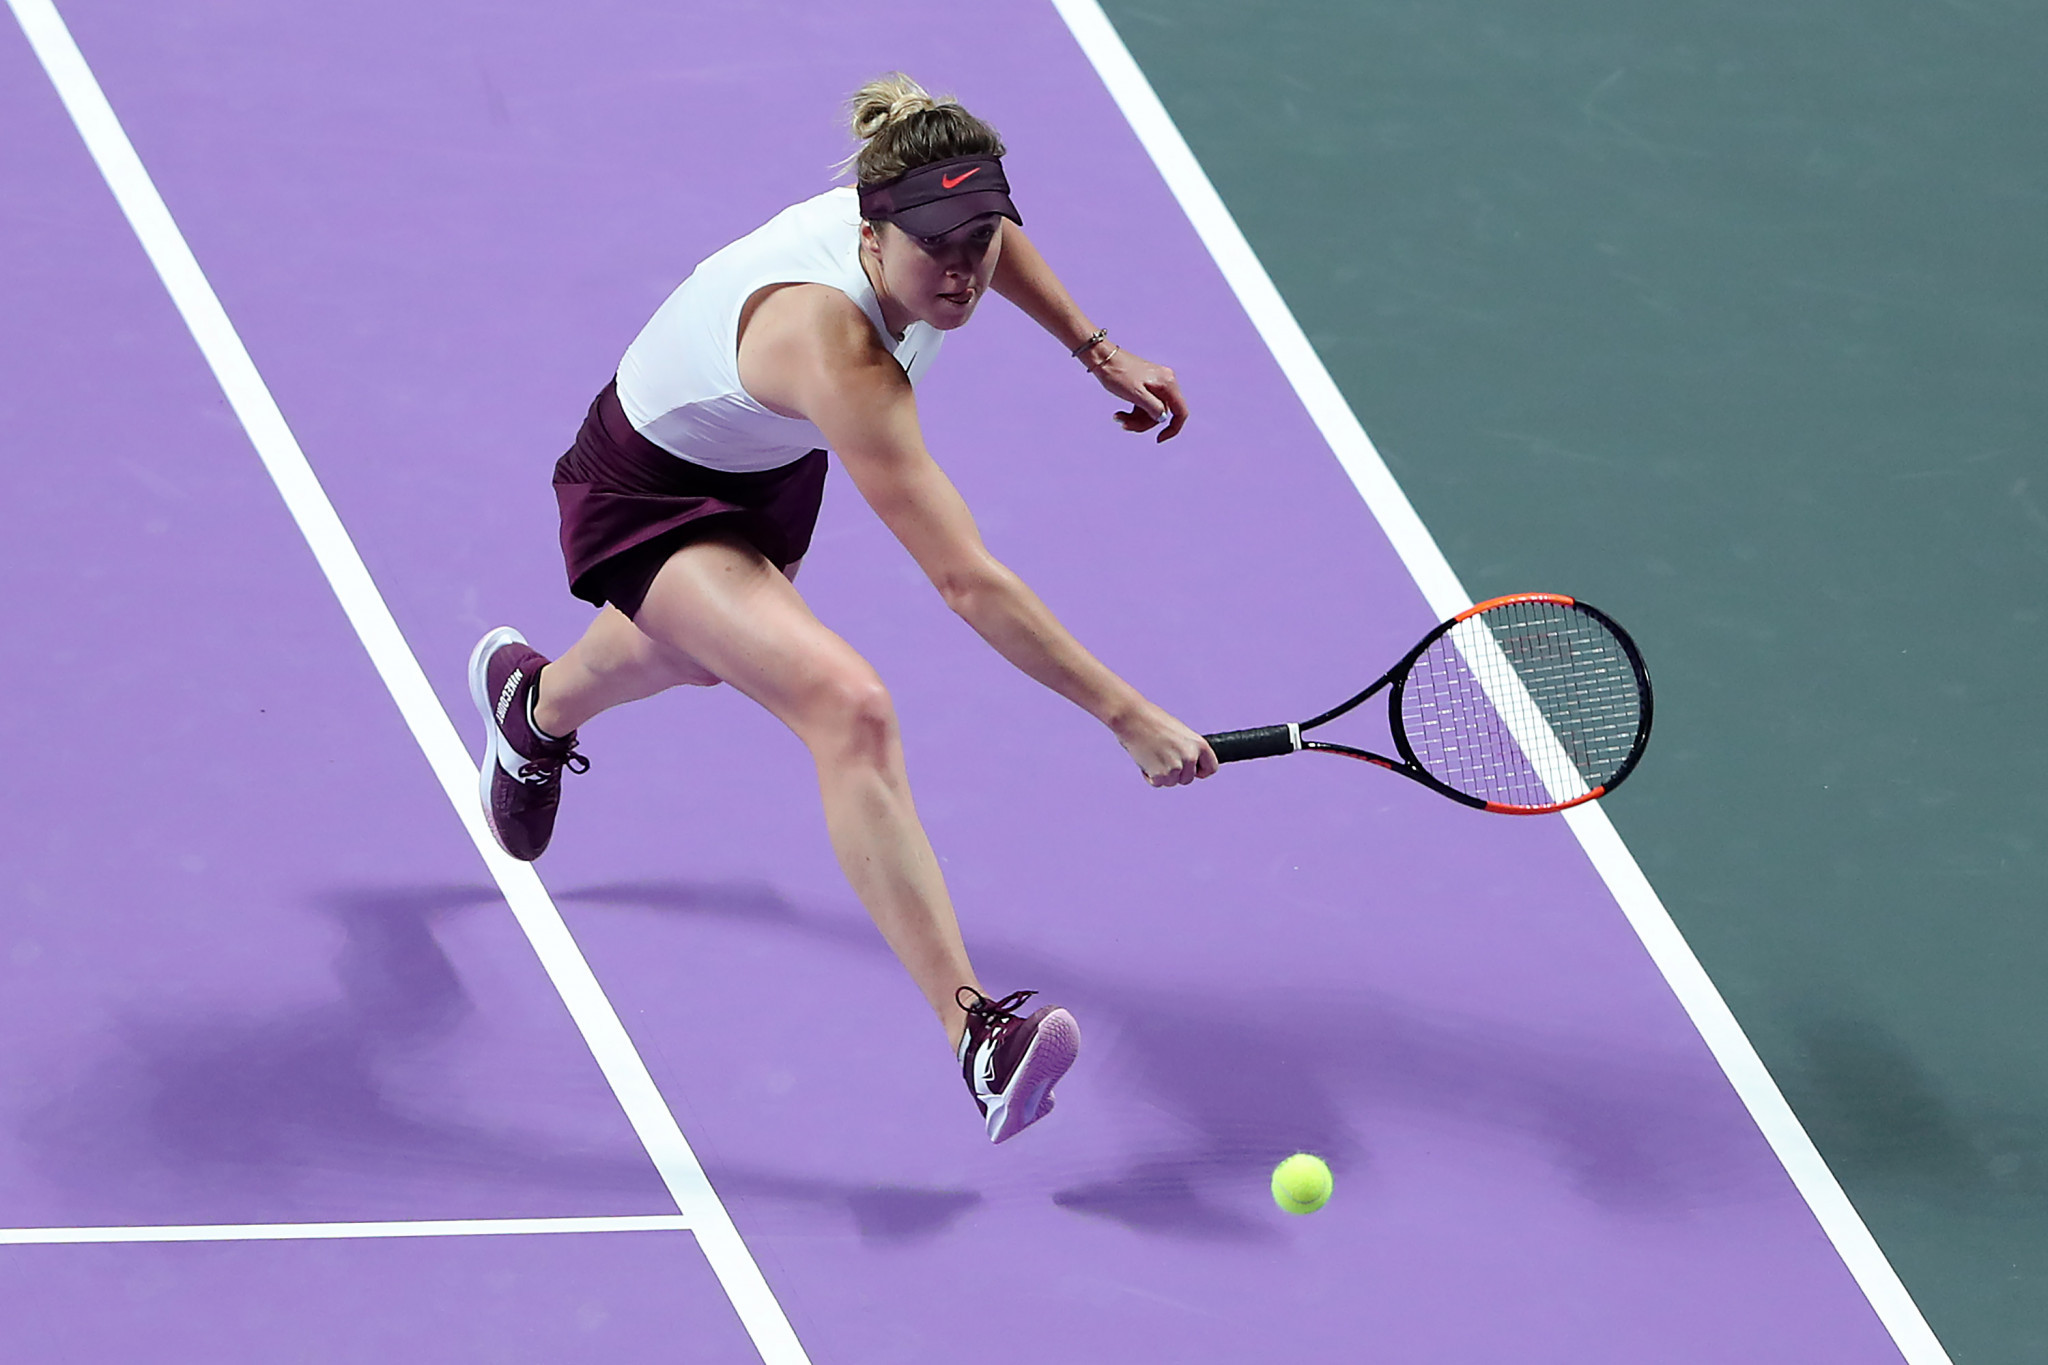 Elina Svitolina got her title defence off to a winning start at the WTA FInals in Shenzhen ©Getty Images